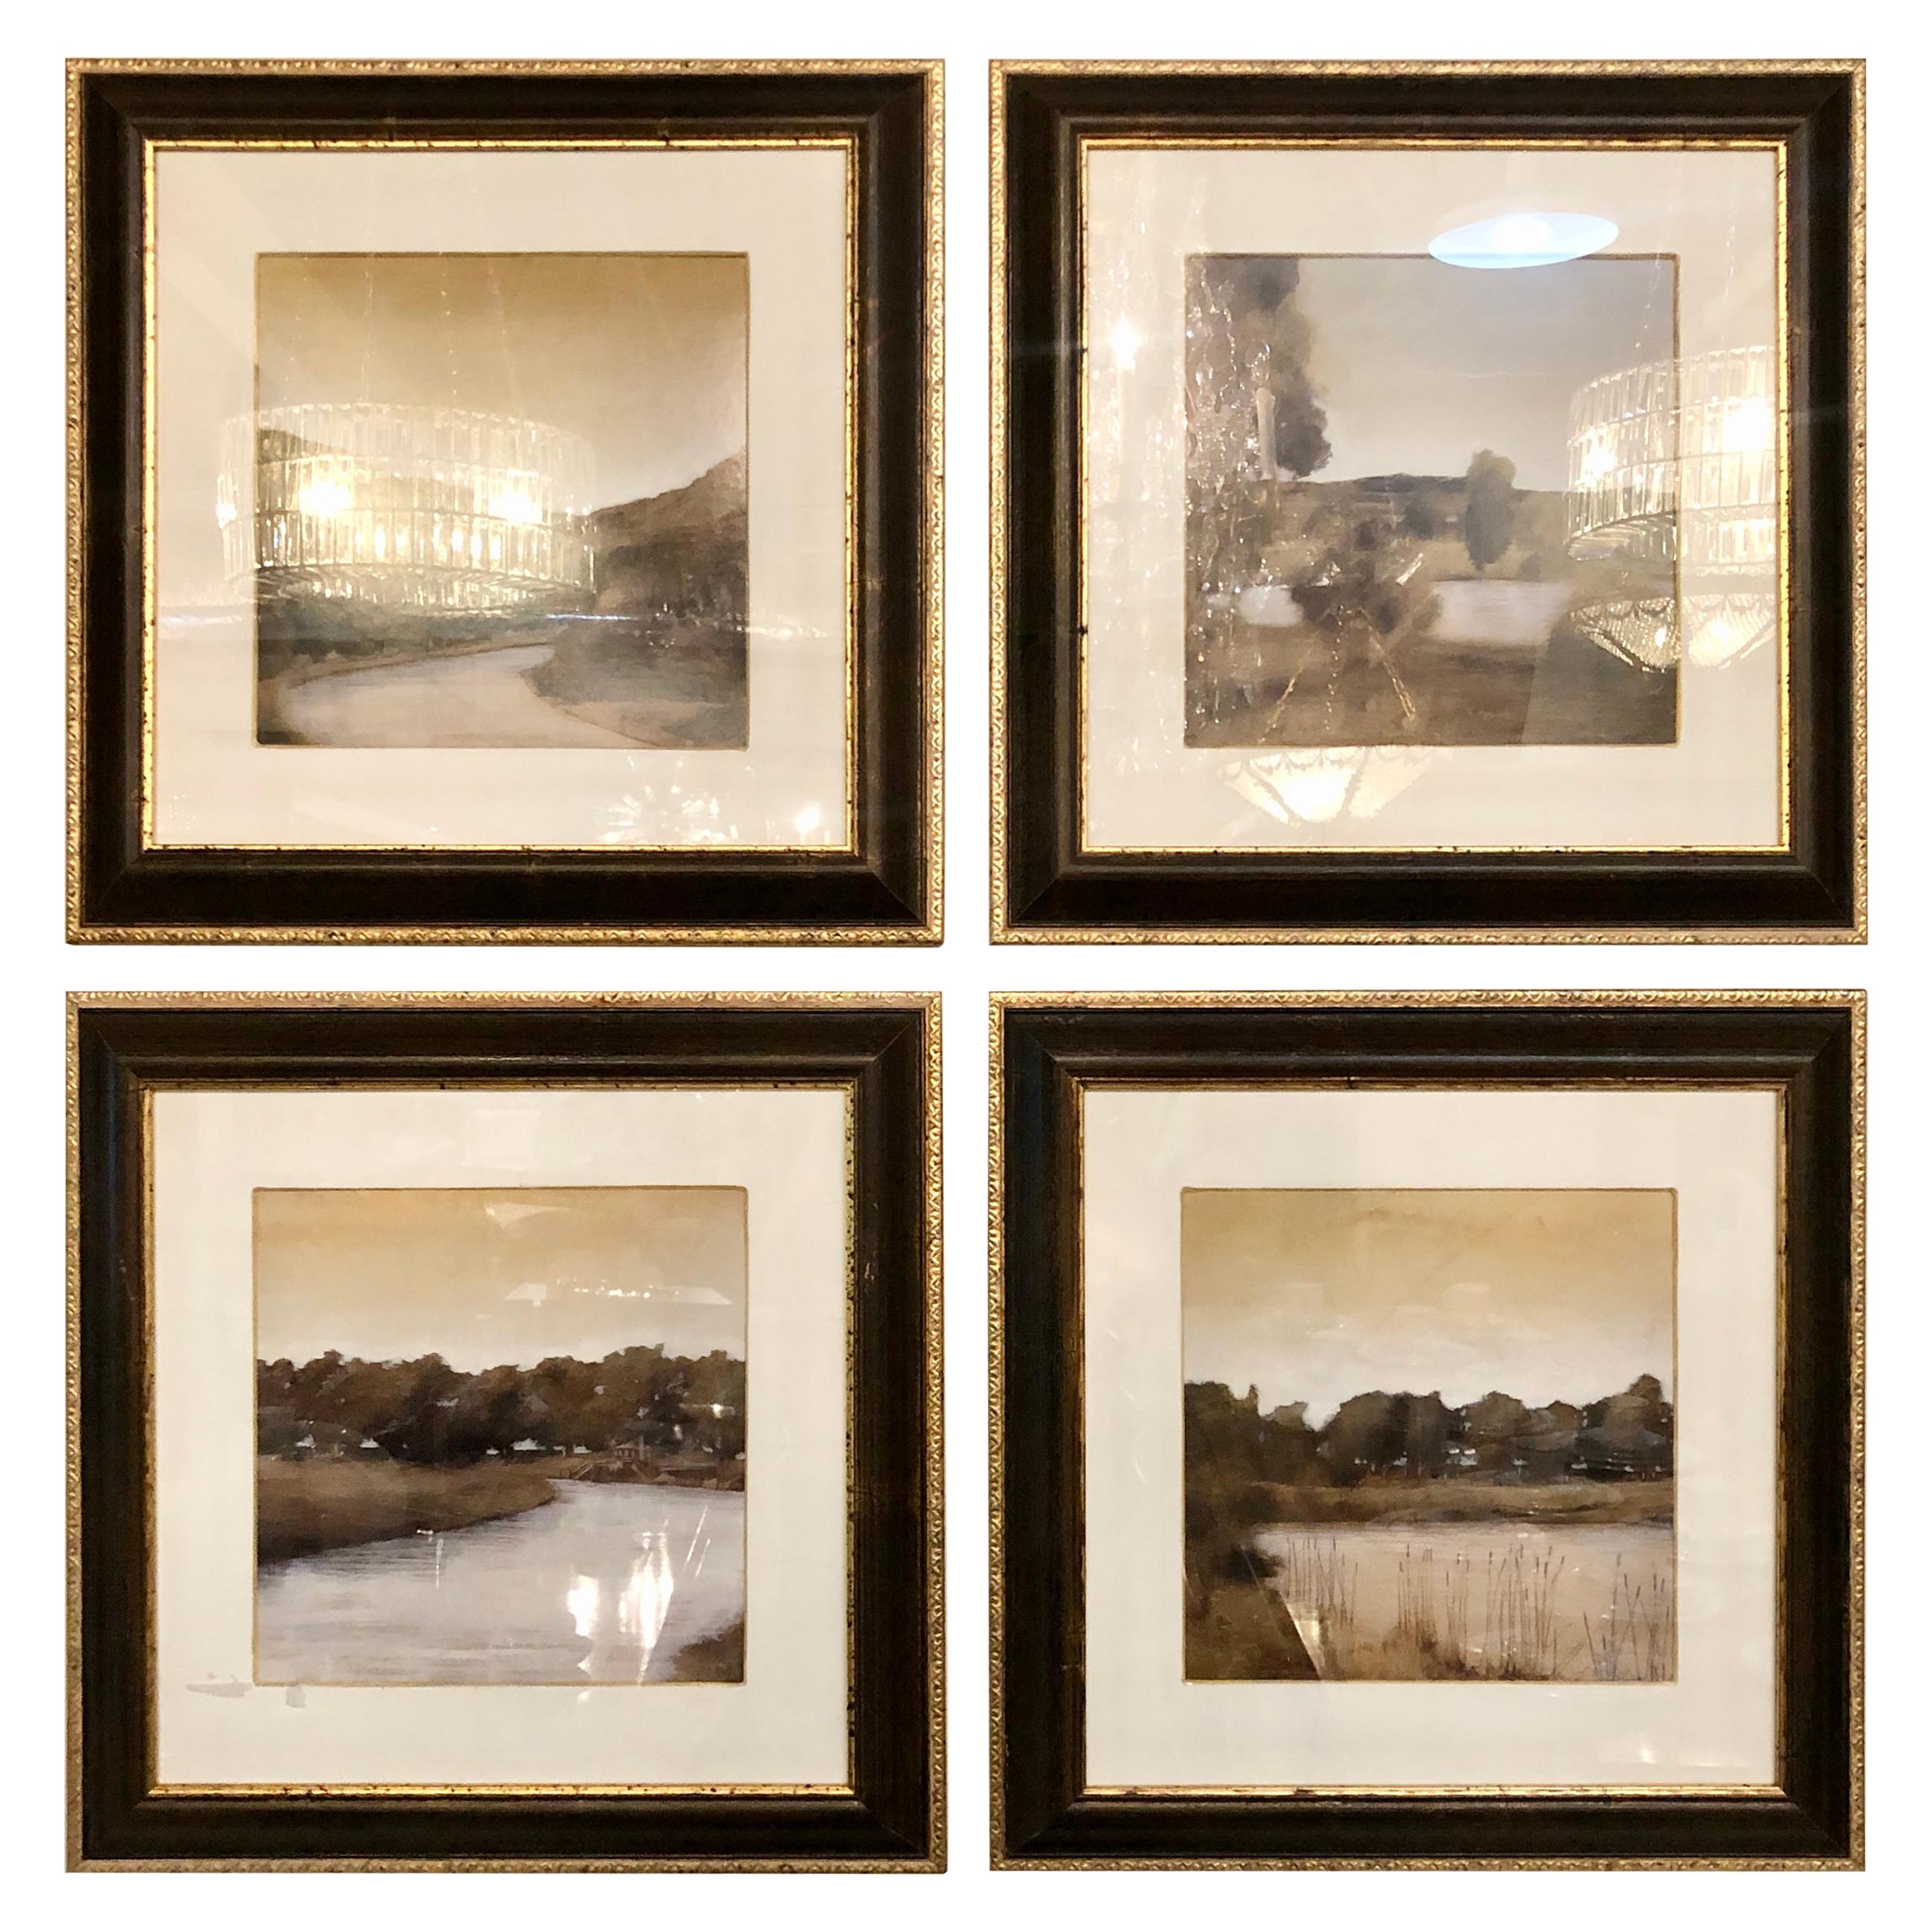 Set of Four Prints in Trowbridge Gallery Frames, Lake and River Scenes